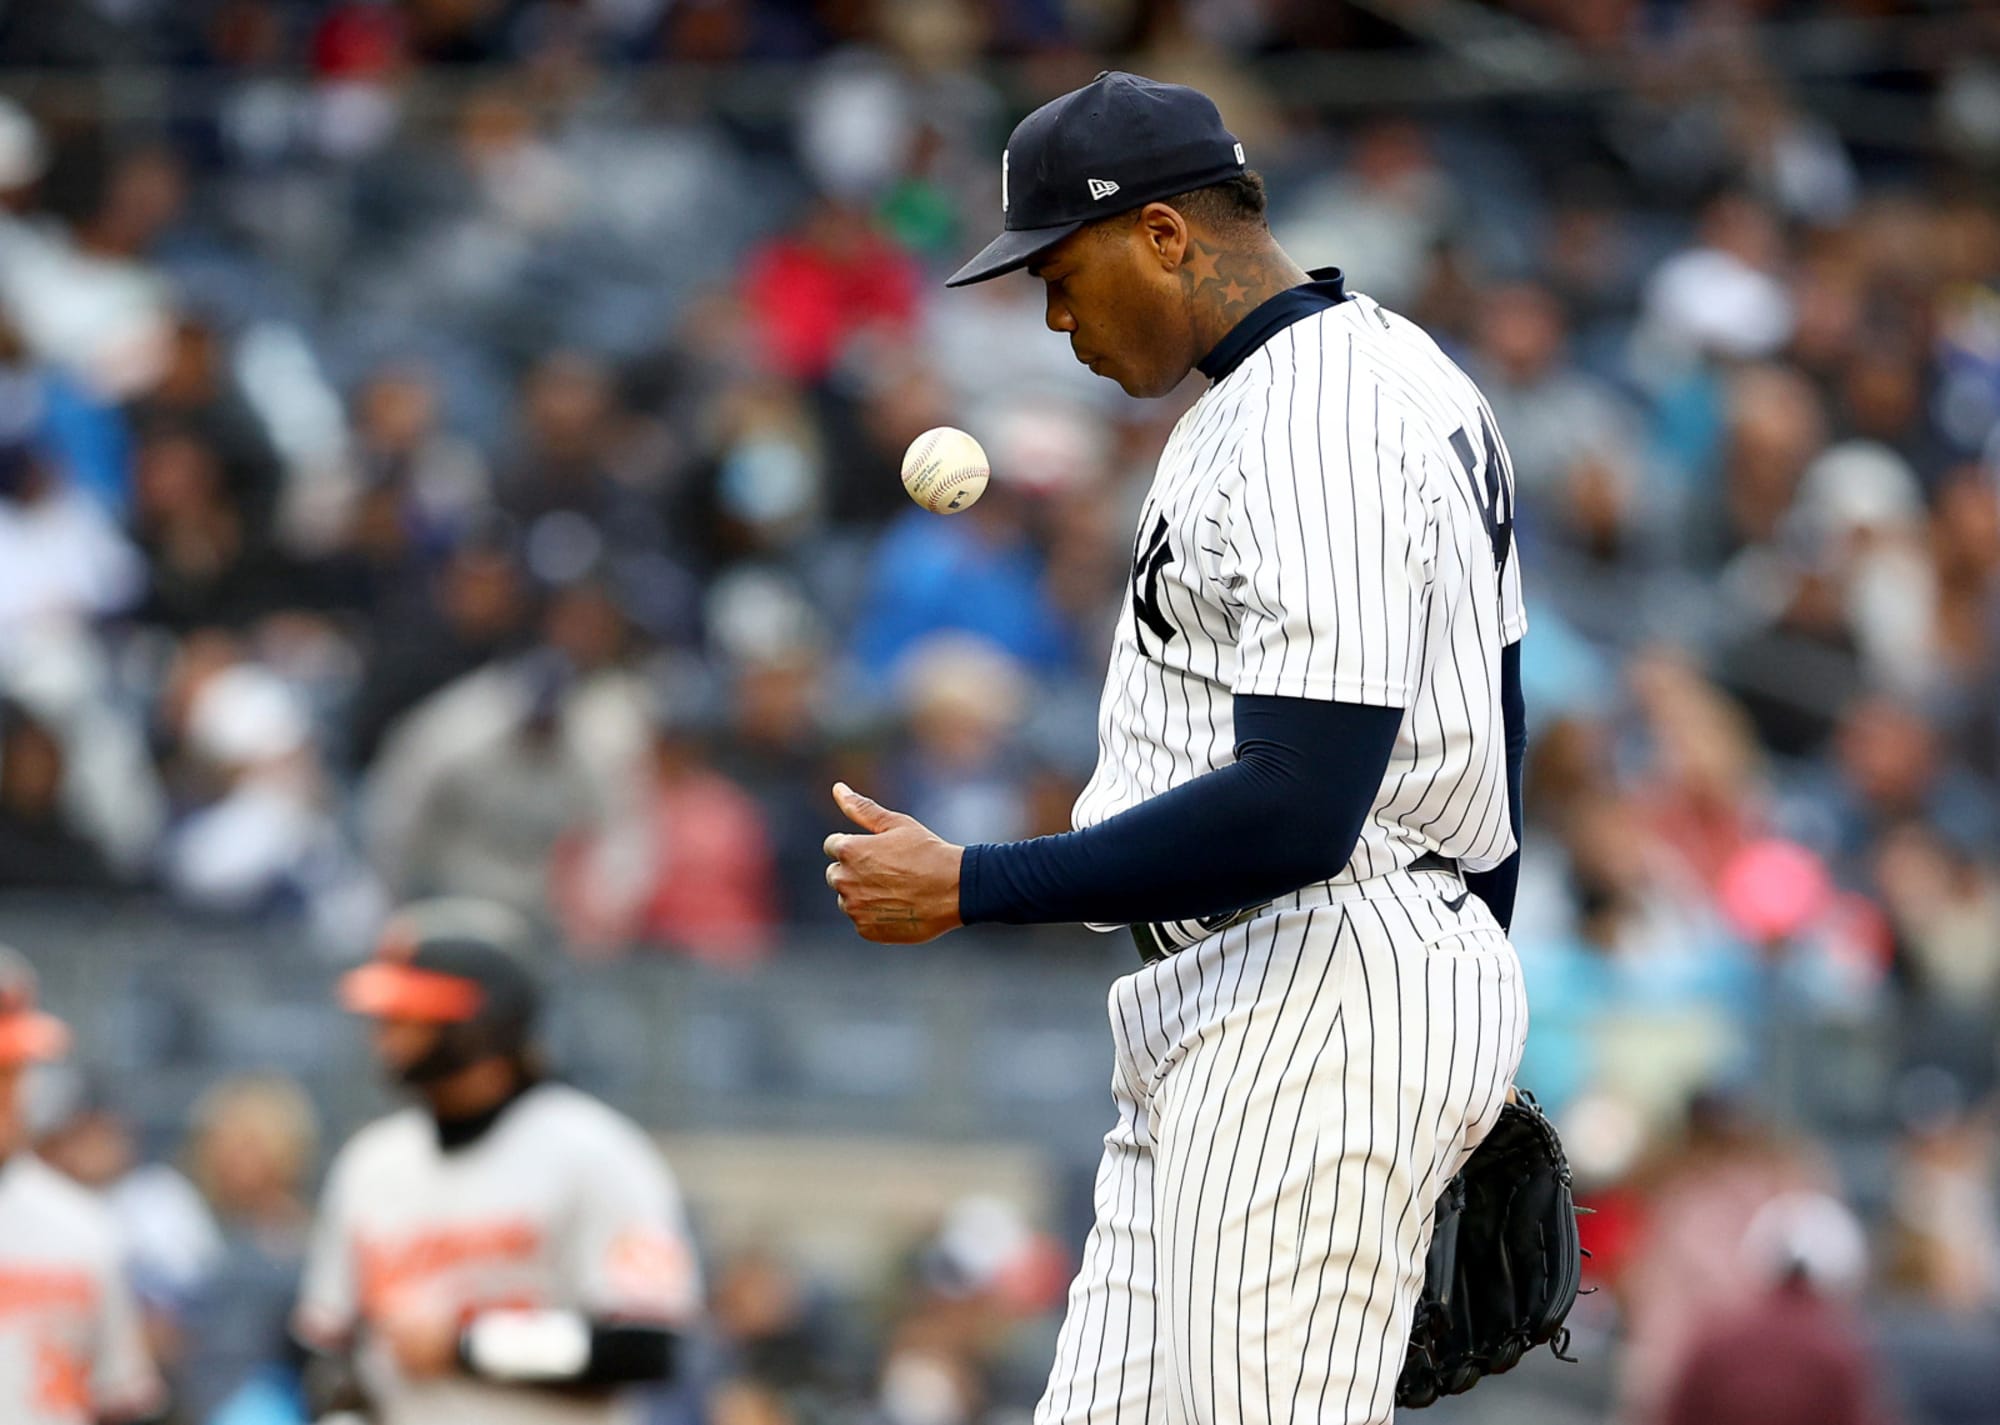 Aroldis Chapman's ego continues to get in the way of his success